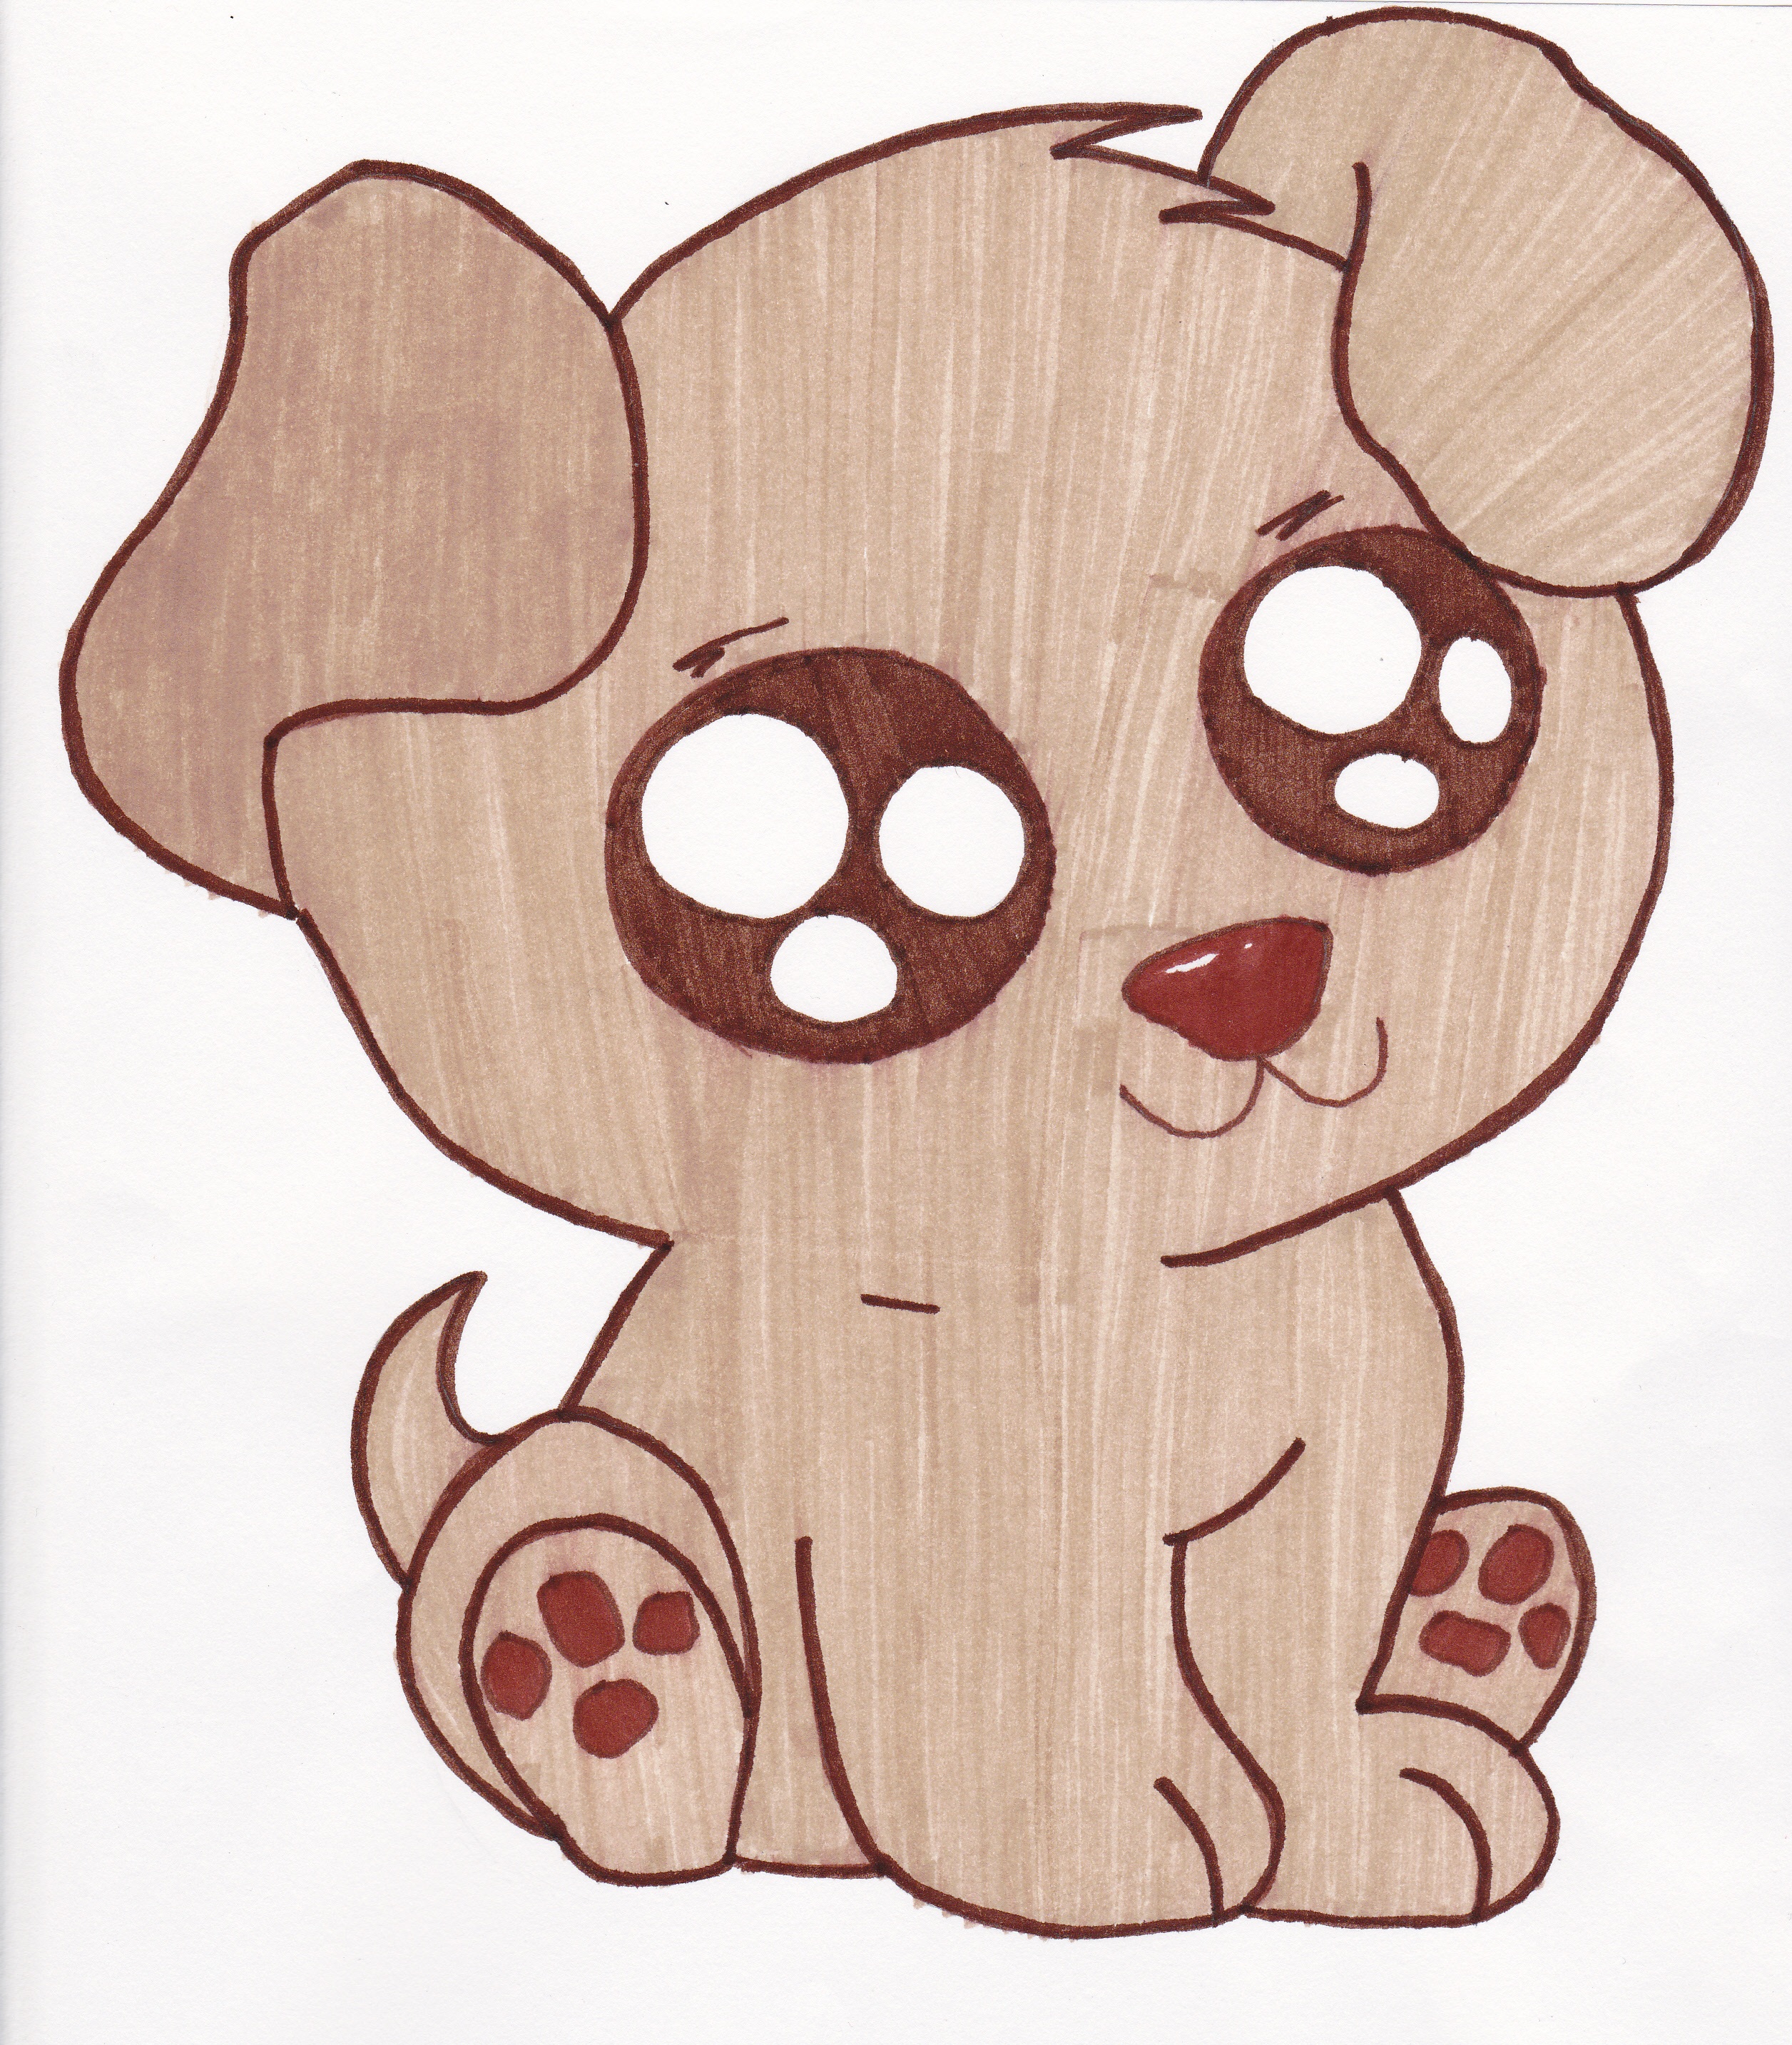 Puppy pictures of cute cartoon puppies clipart 2 image